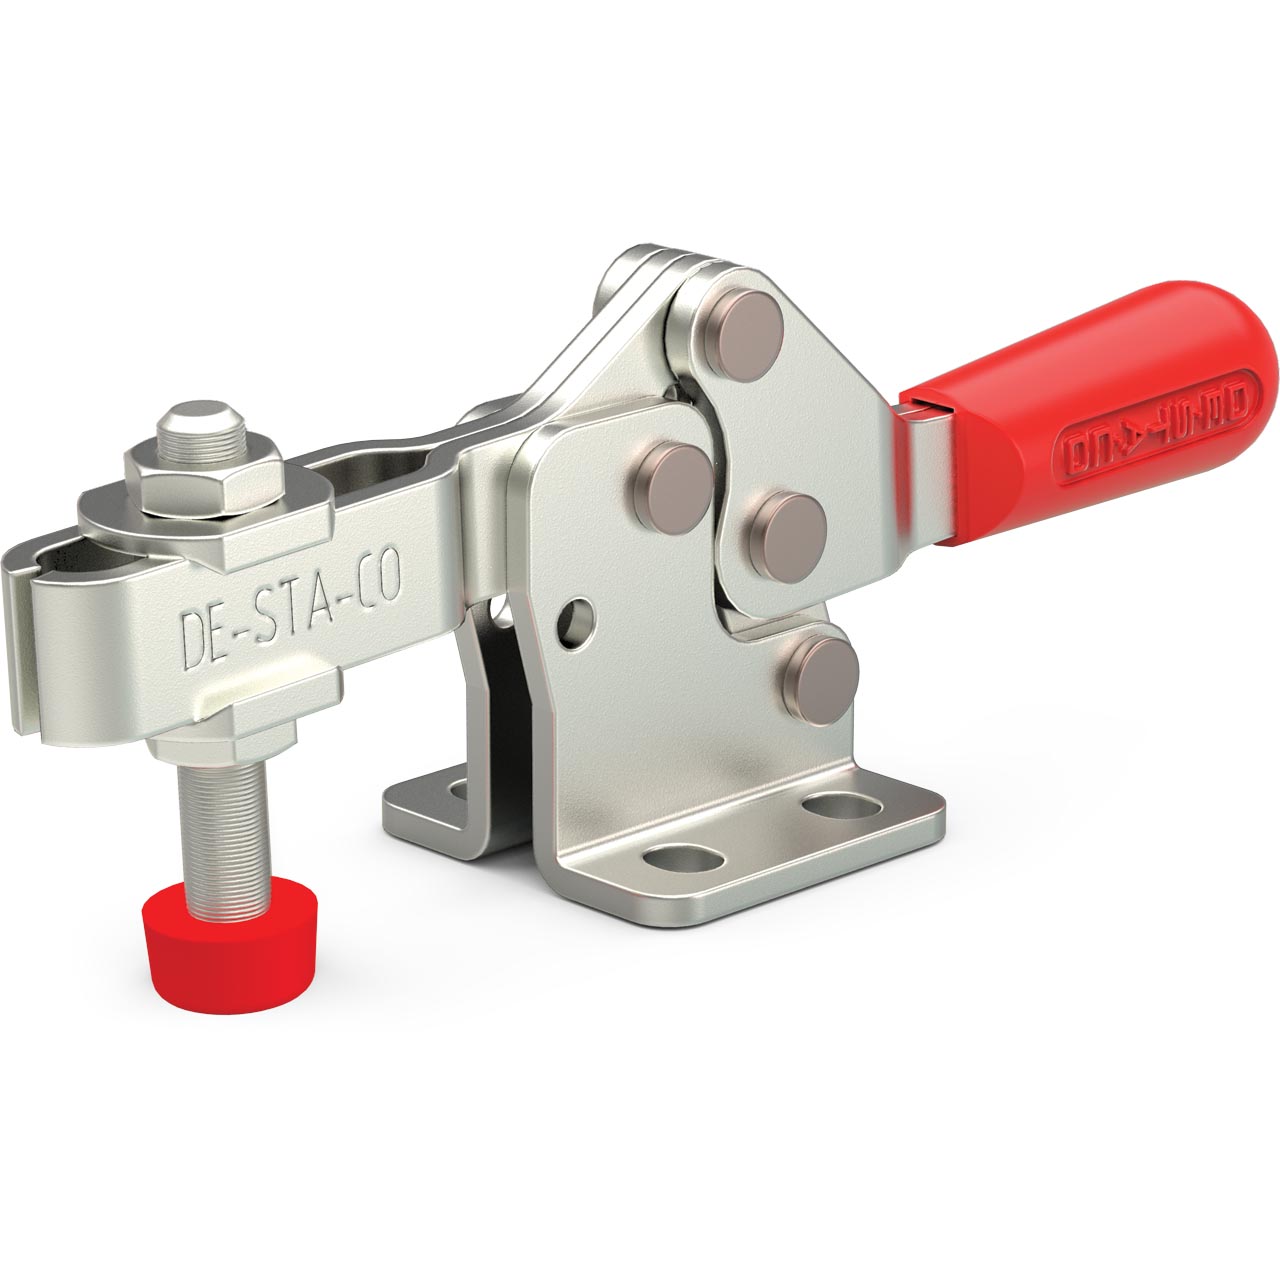 DE STA CO 207-U  207 Vertical Hold Down Action Clamp with U-Shaped Bar and Flanged Base 